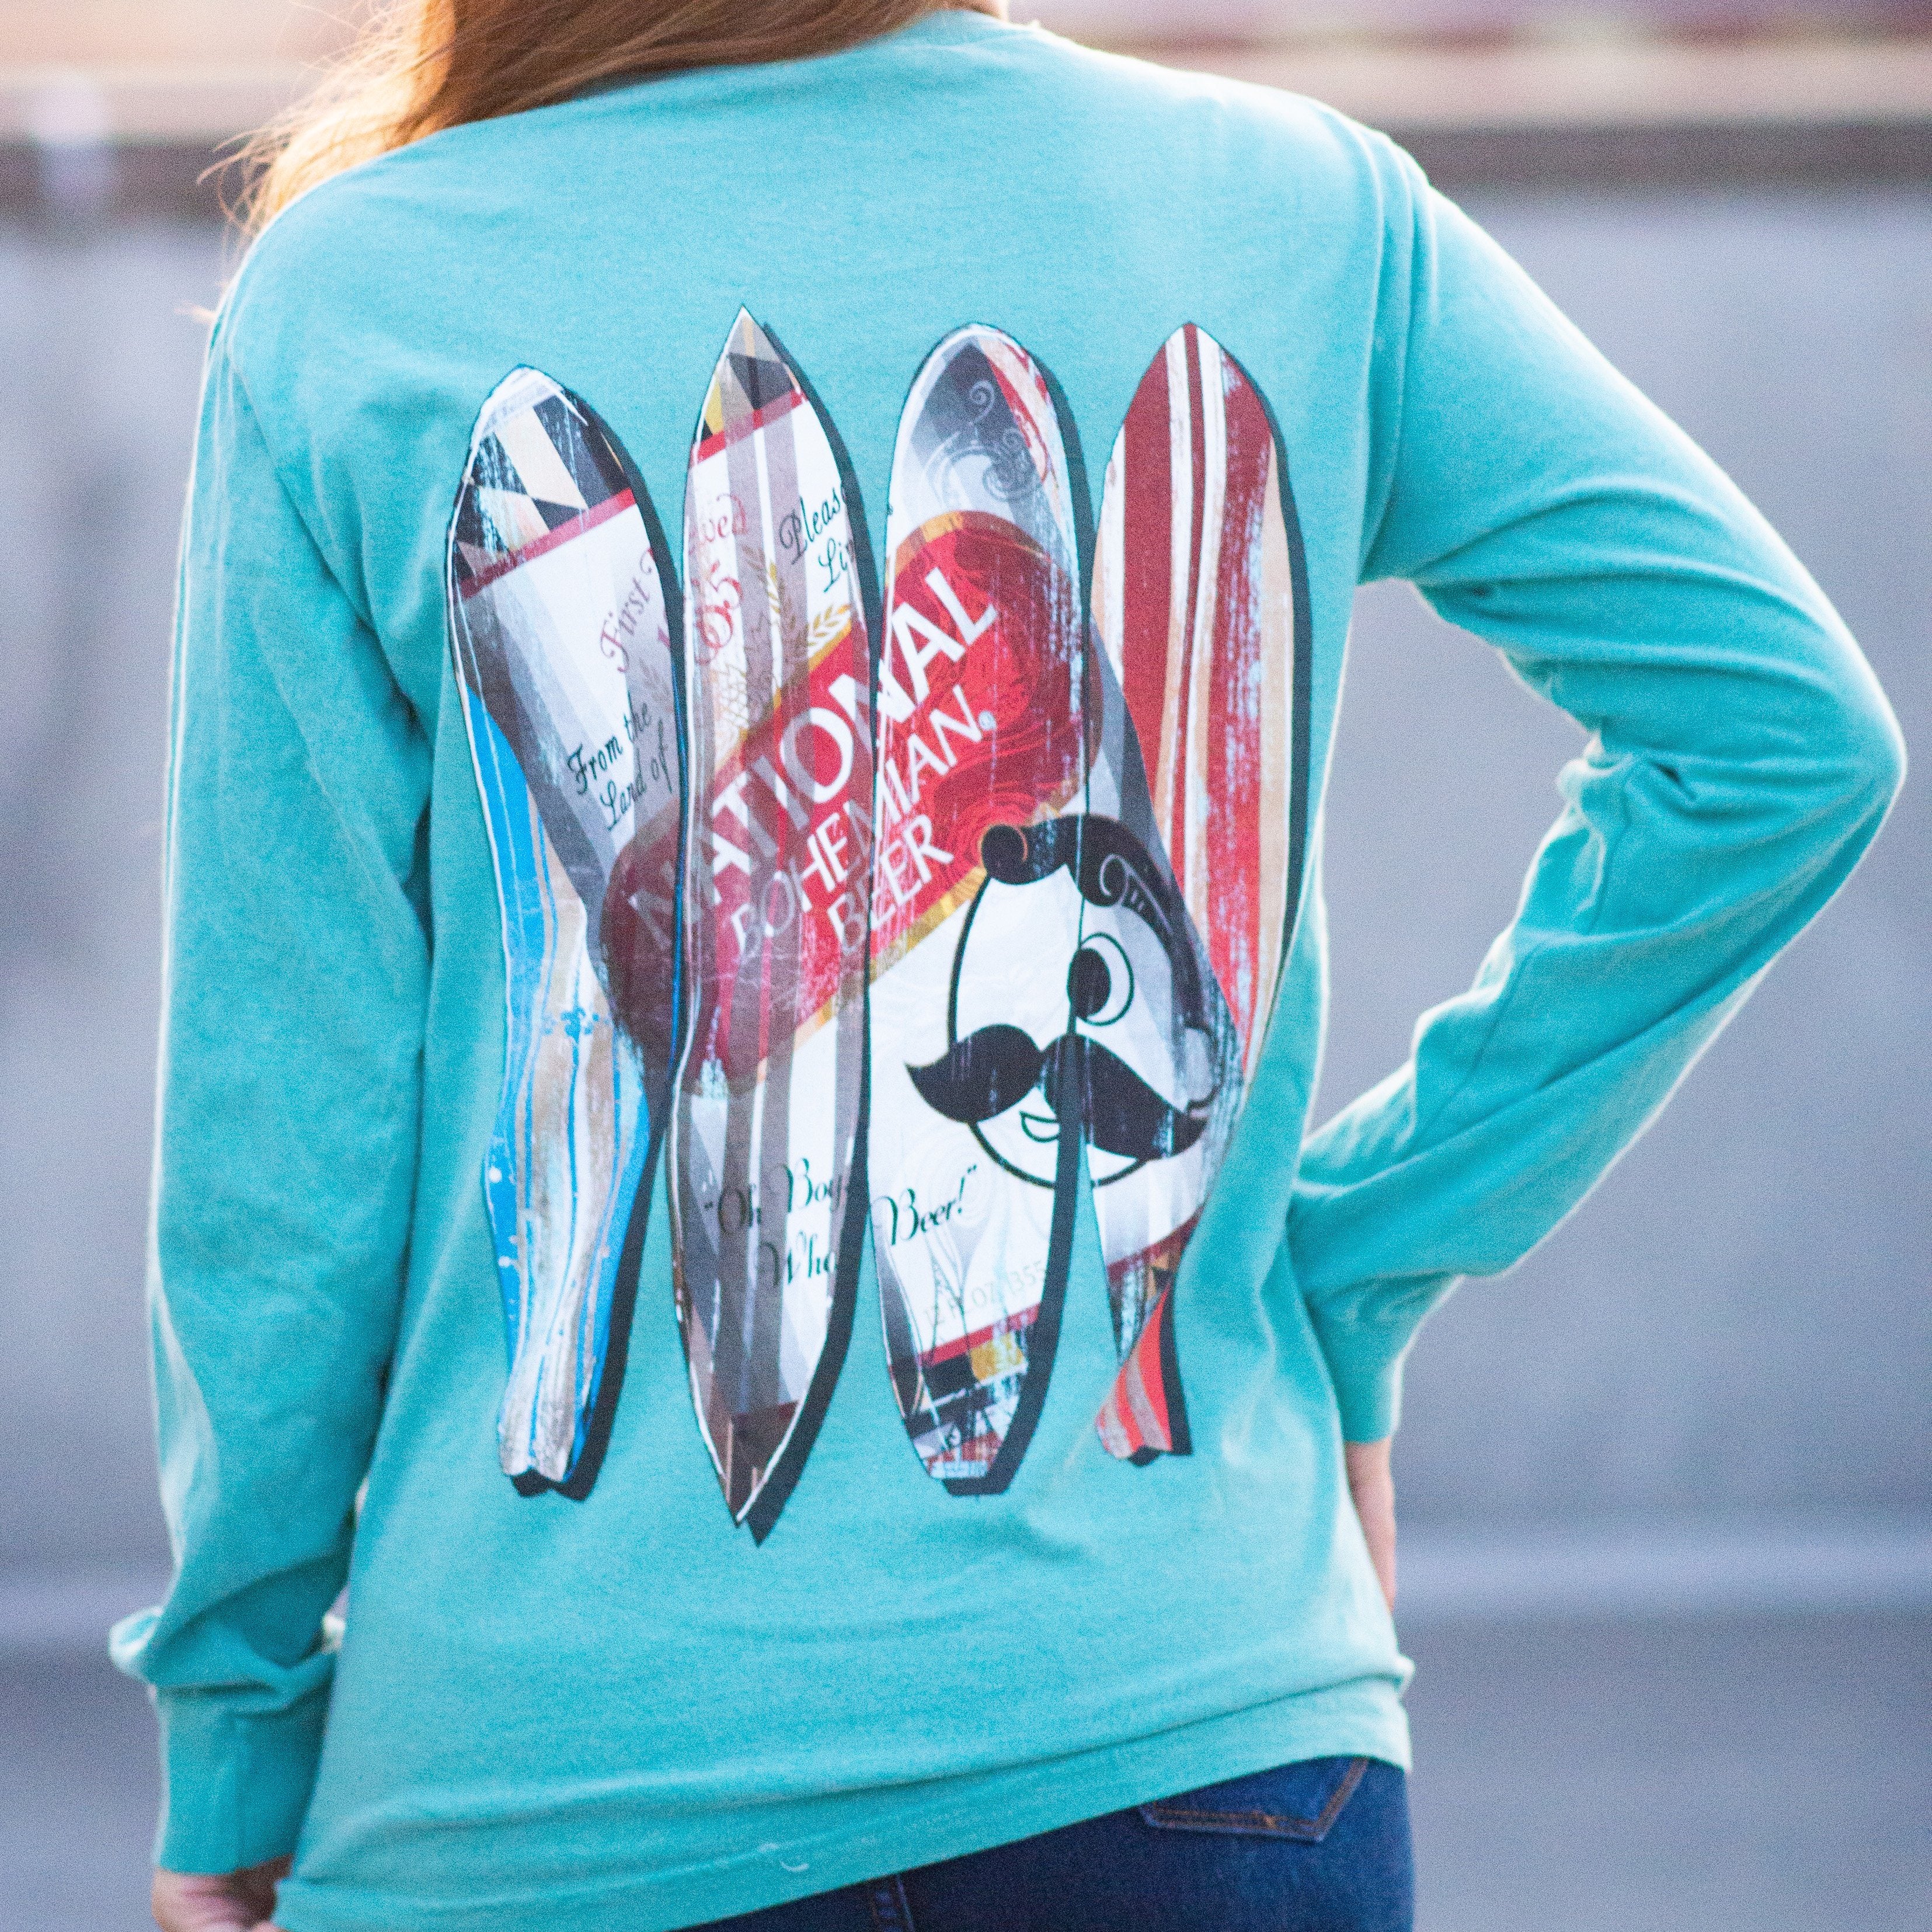 Natty Boh Can Surfboards (Seafoam) / Long Sleeve Shirt - Route One Apparel